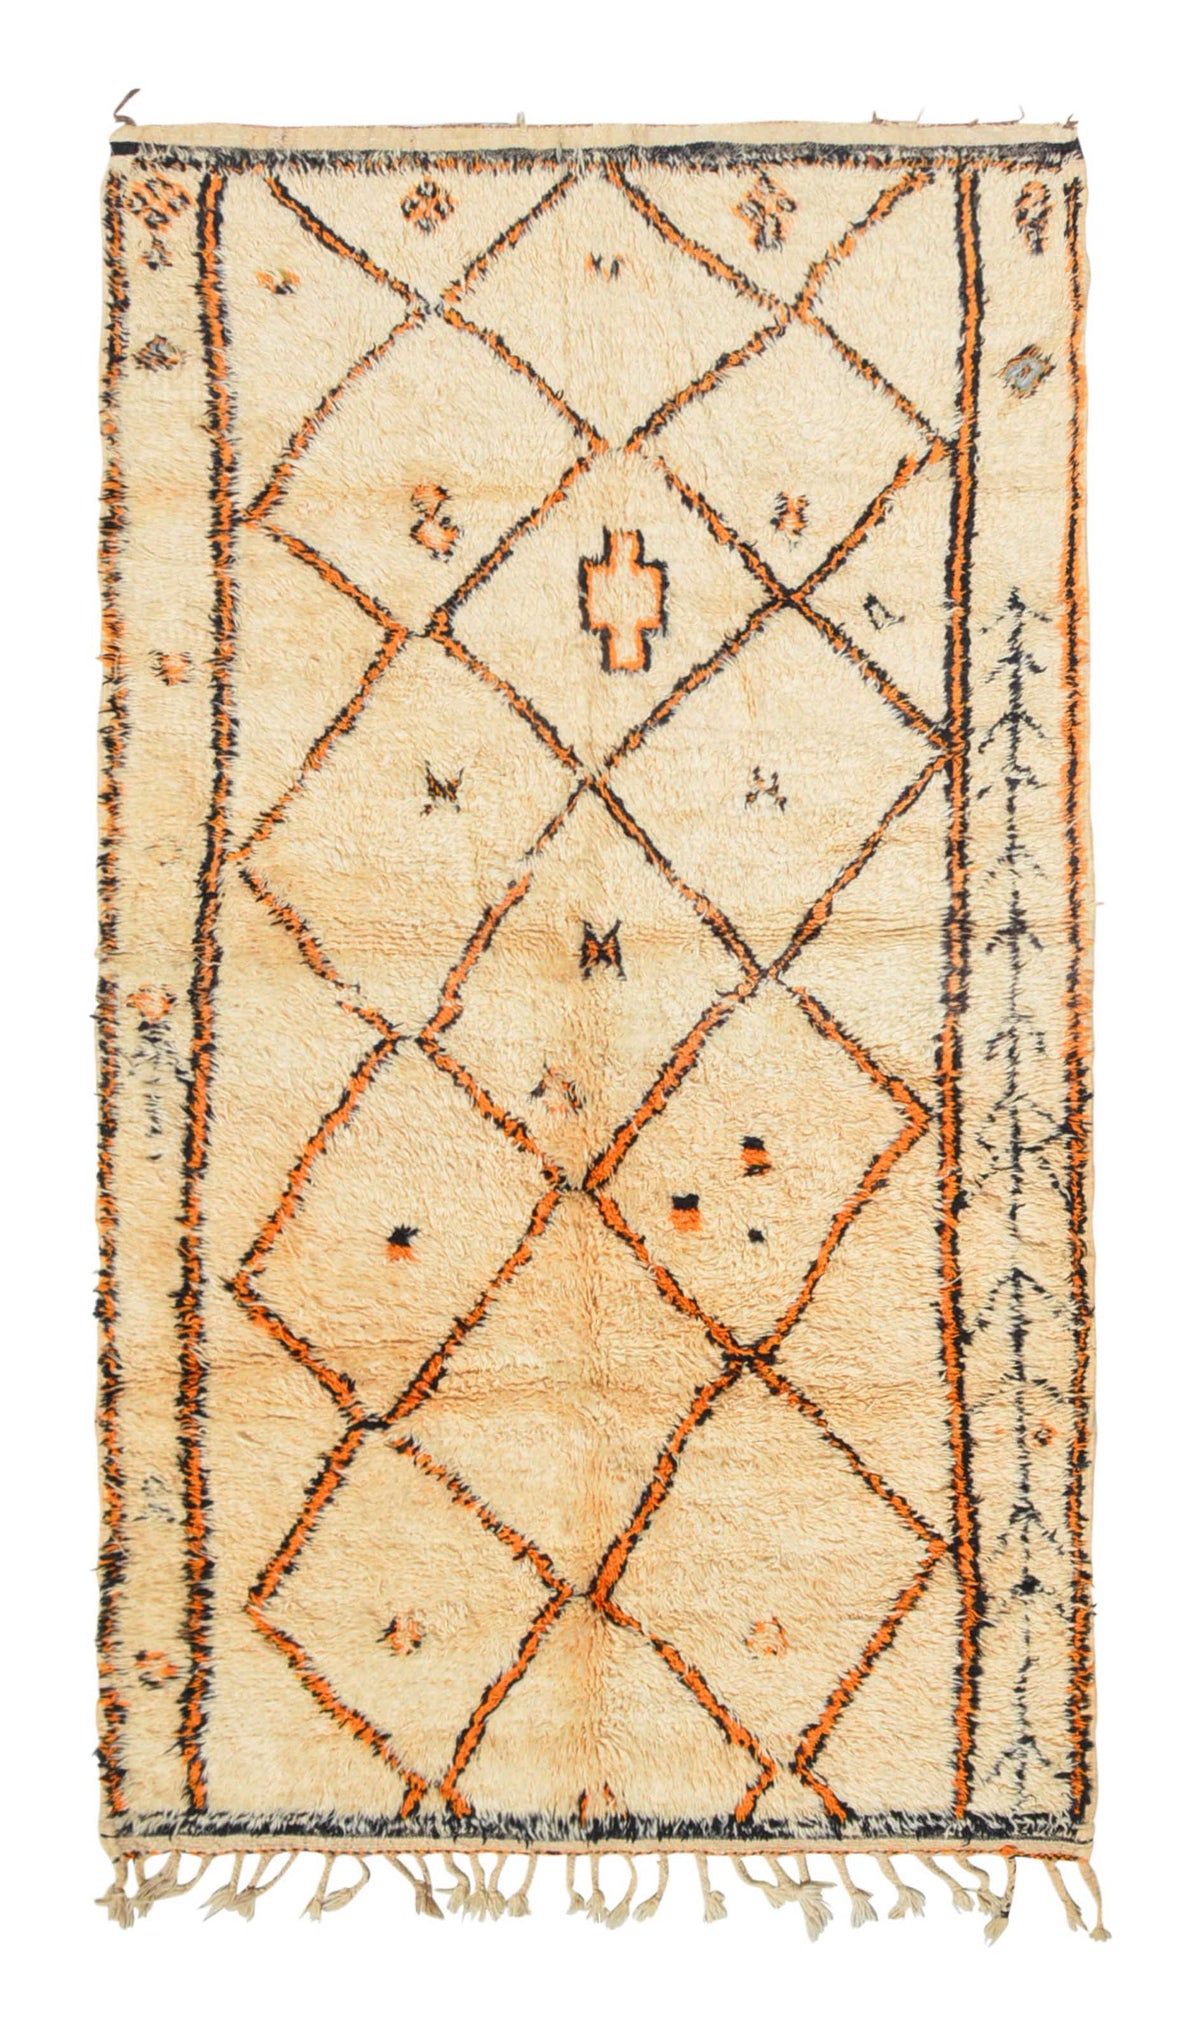 Vintage Moroccan Rug Vintage Style Rugs - Small Moroccan Rug illuminate collective